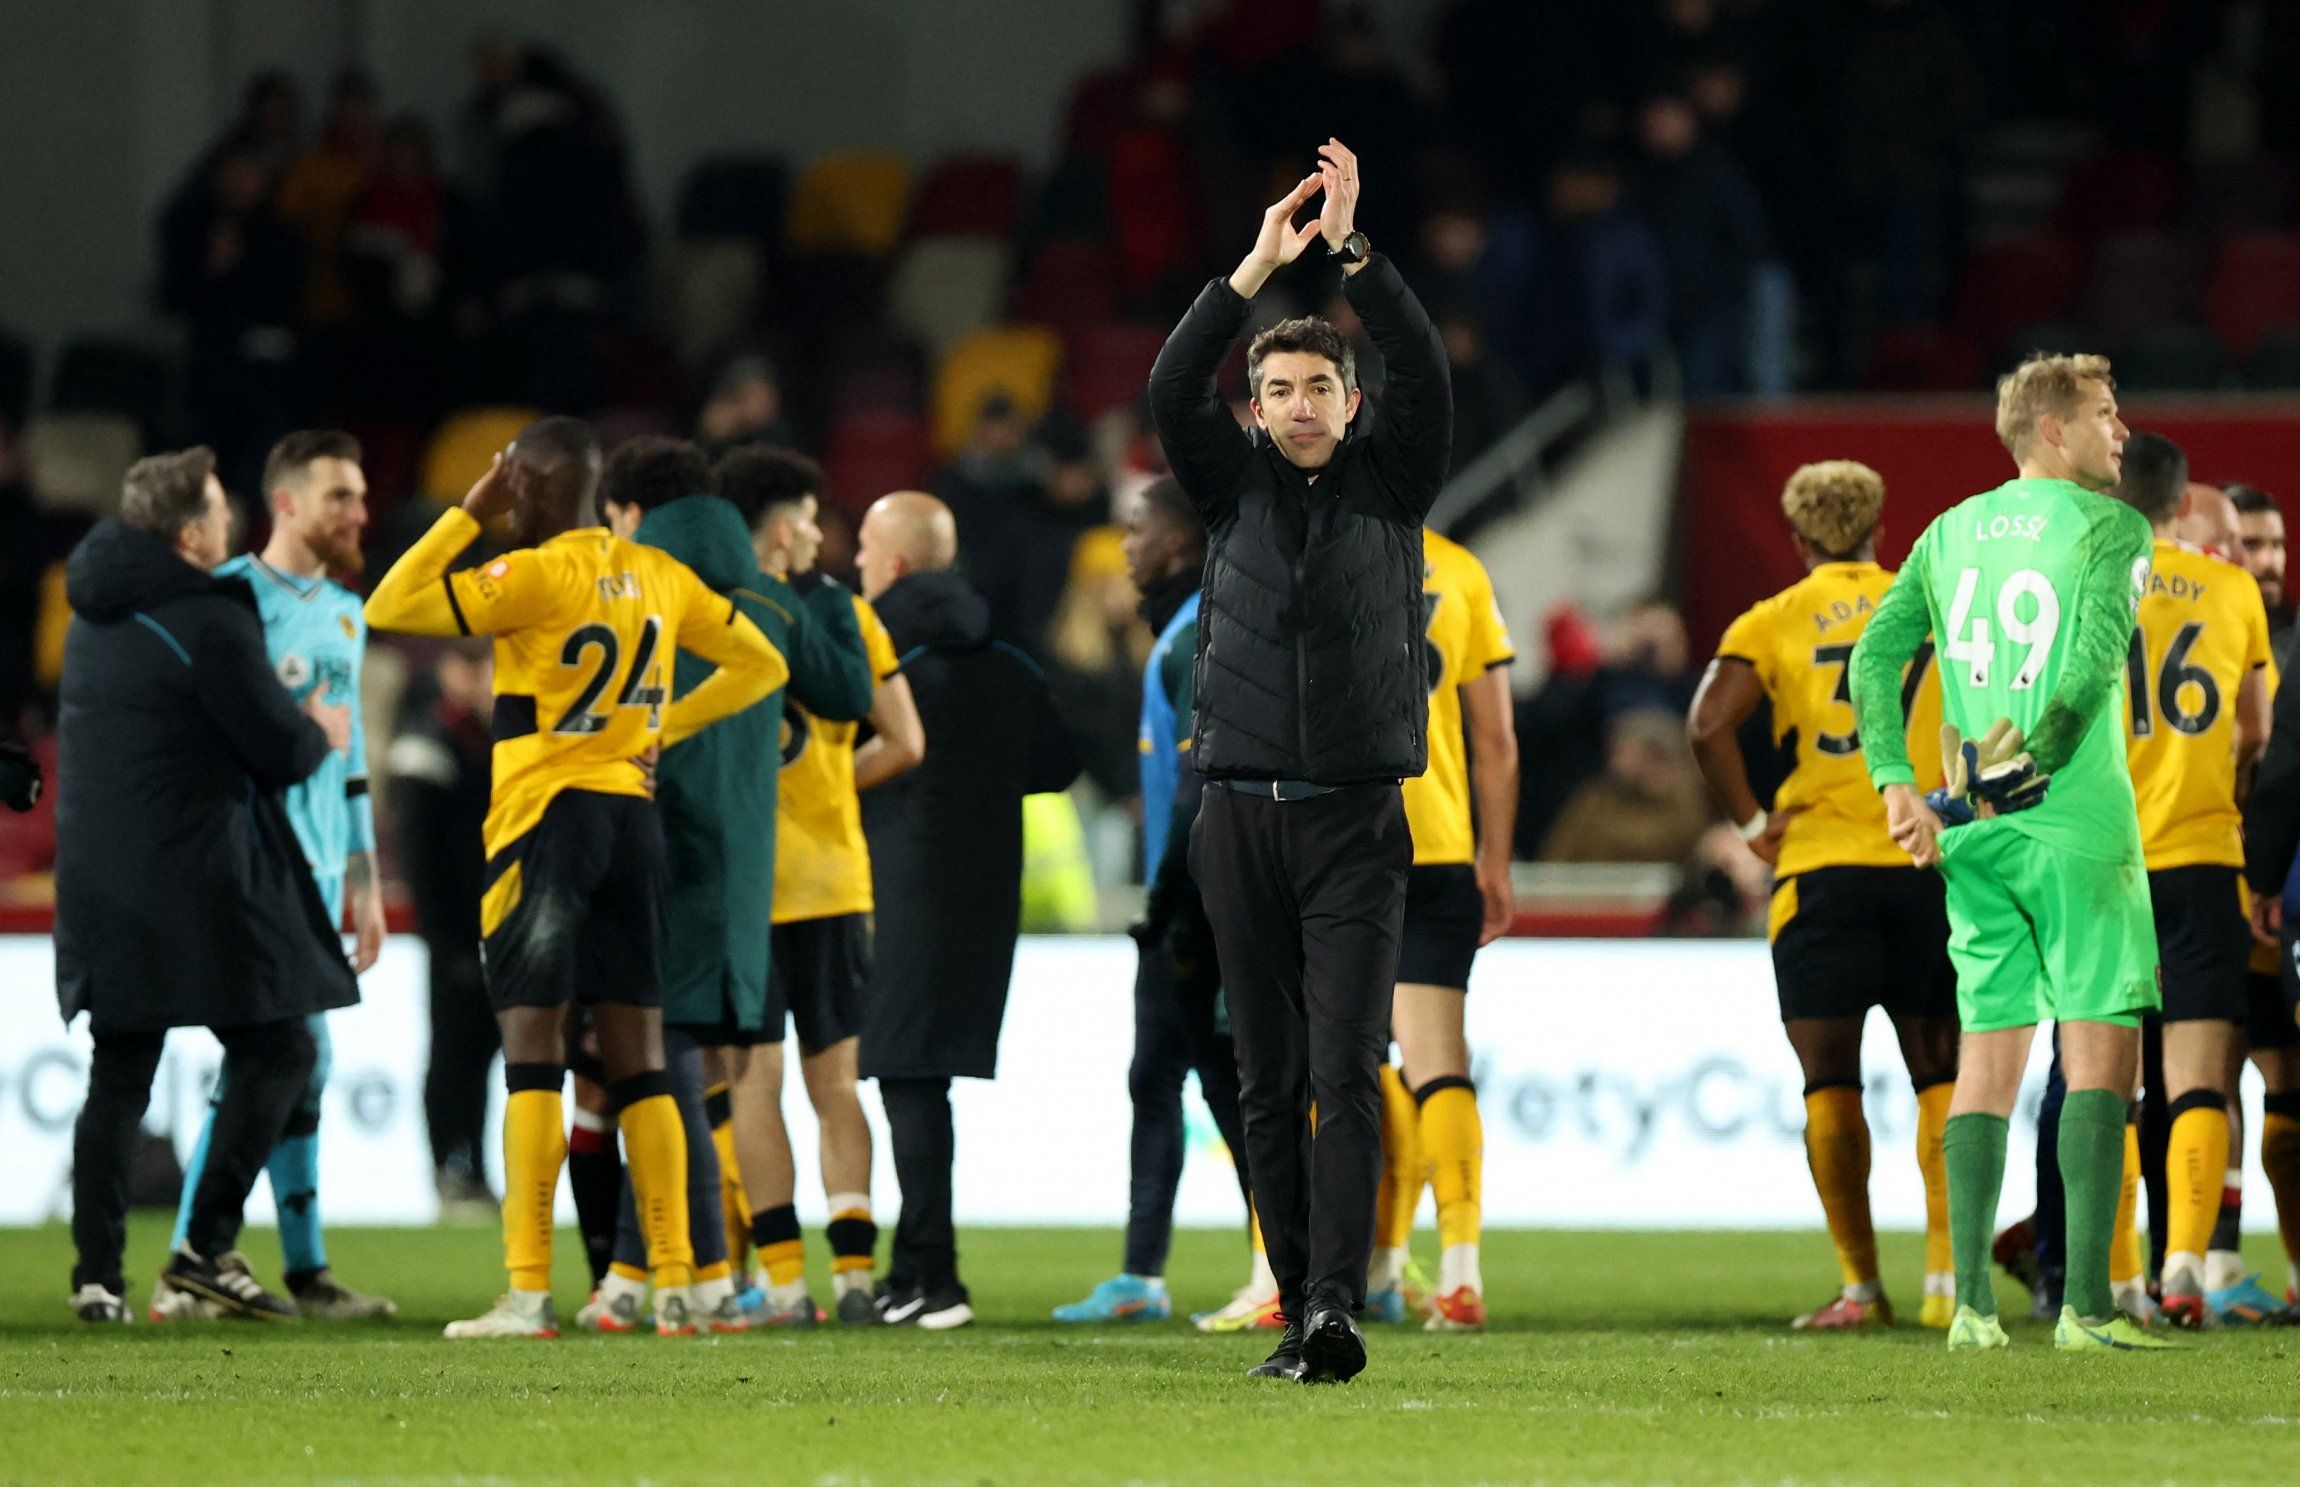 Bruno Lage, Fosun, Jeff Shi, Molineux, The Old Gold, Wolves, Wolves fans, Wolves info, Wolves latest, Wolves news, Wolves updates, WWFC, WWFC news, WWFC update, Premier League, Premier League news, Wolverhampton Wanderers, Wolves transfer news, January transfer window, Tim Spiers, The Athletic, 
